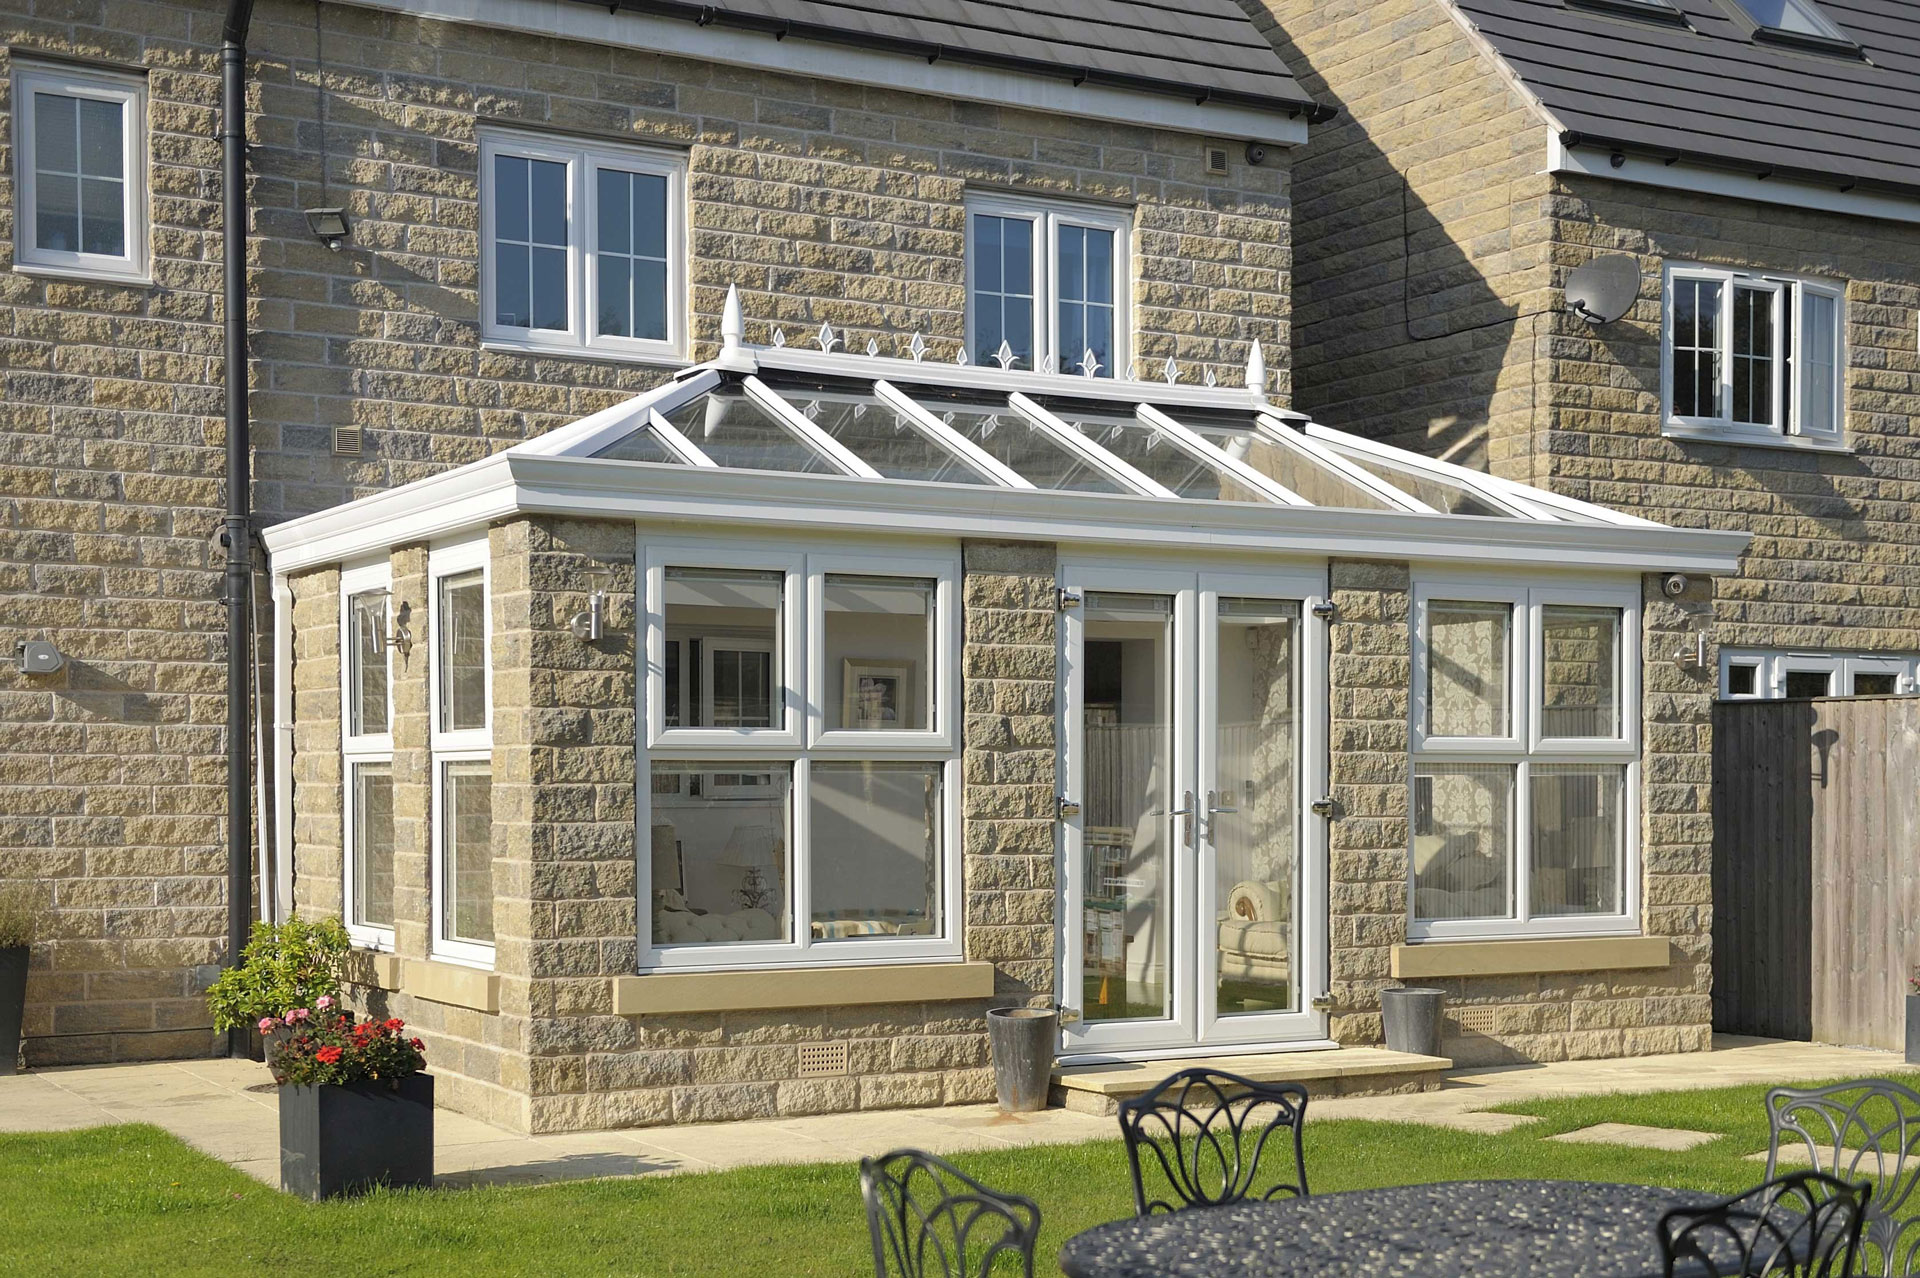 An orangery on the back of a large stone built house.